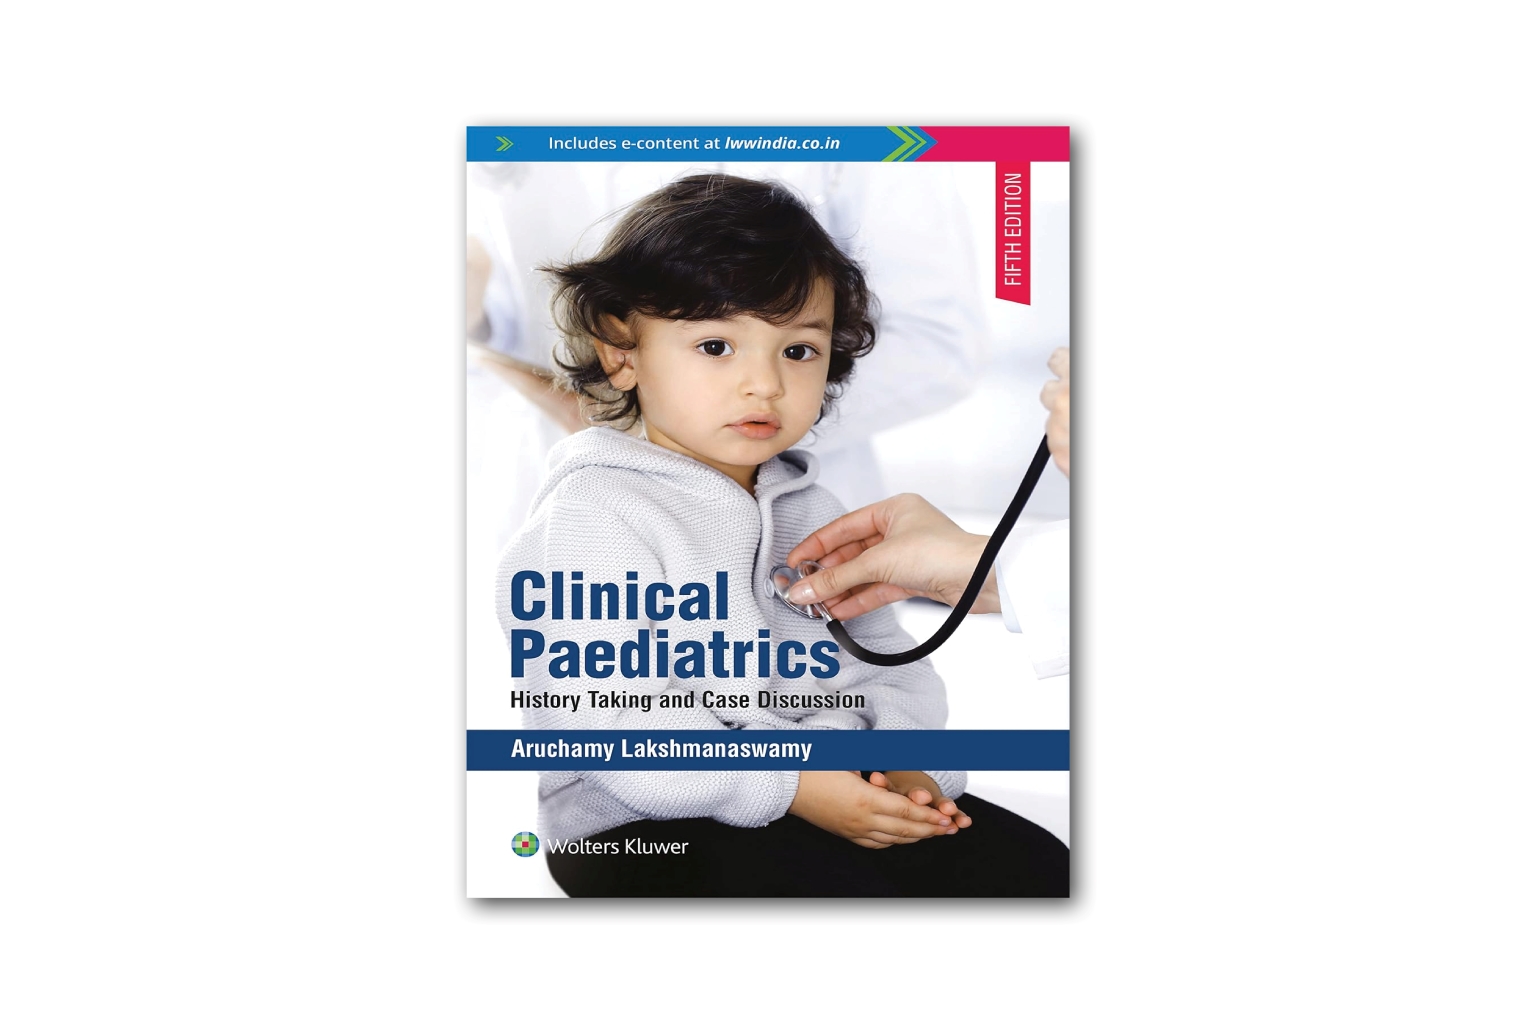 Clnical Paediatrics 5th Edition eContent cover